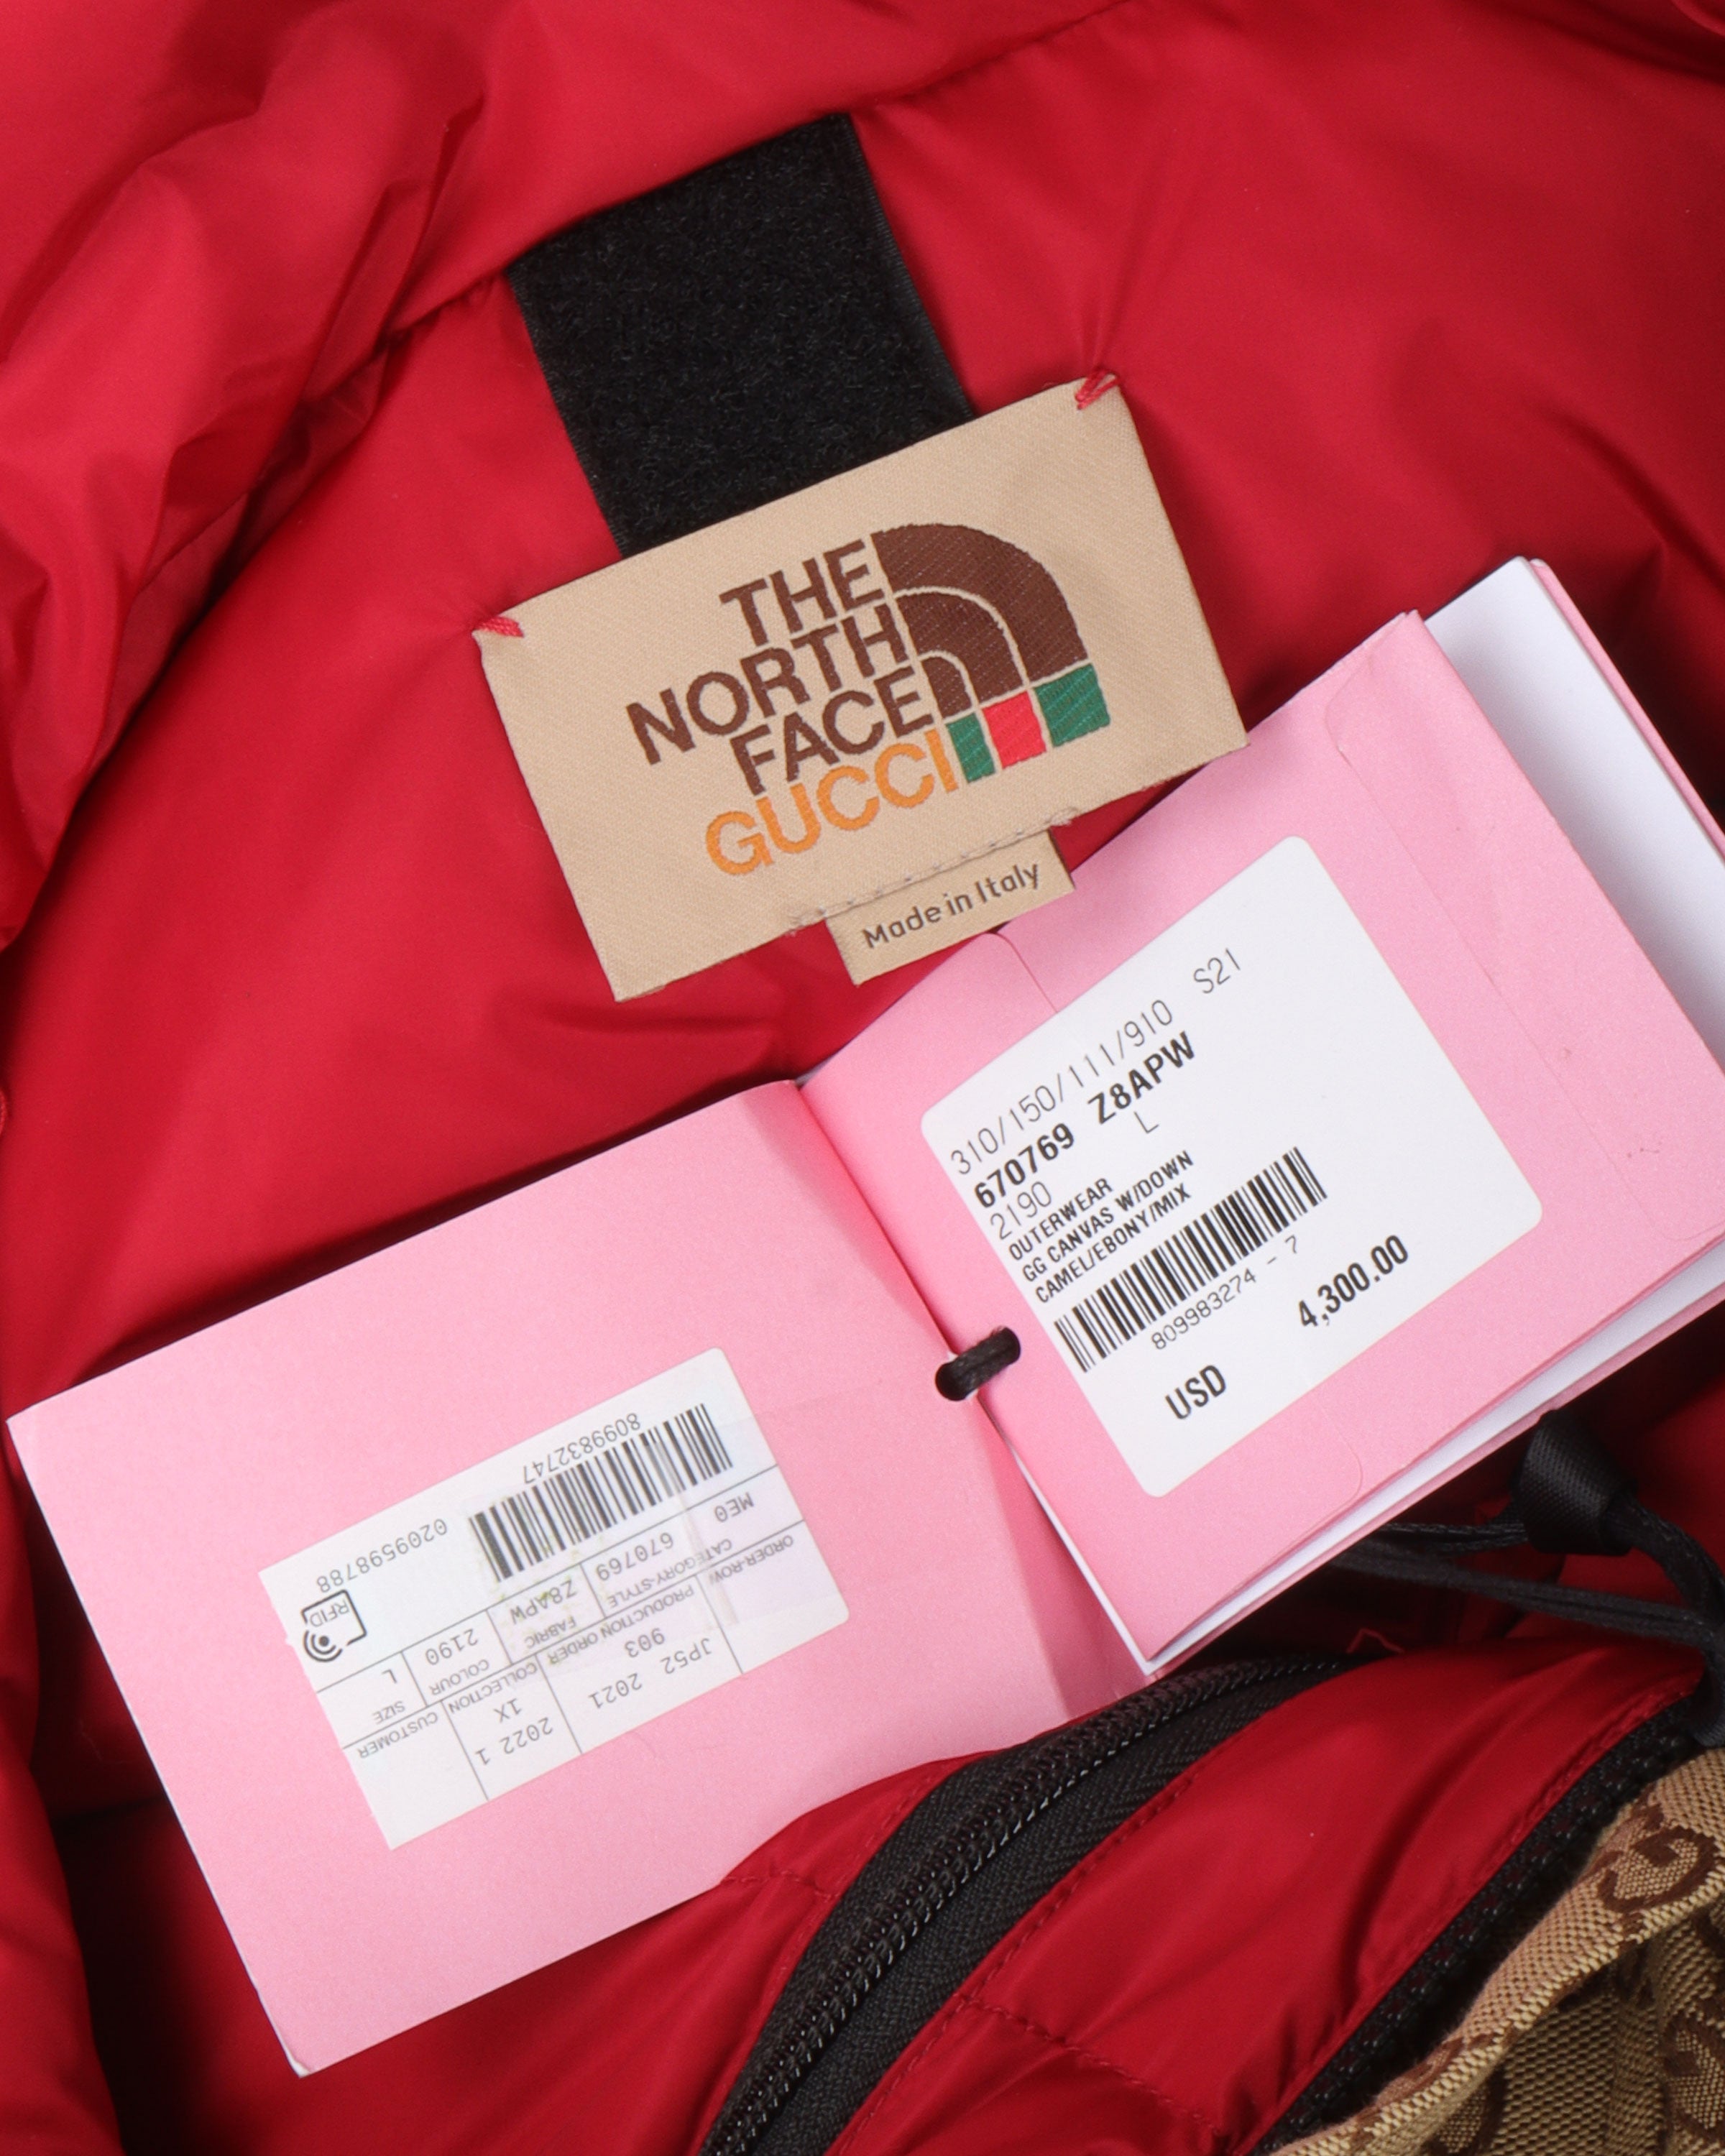 The North Face Monogram Down Jacket